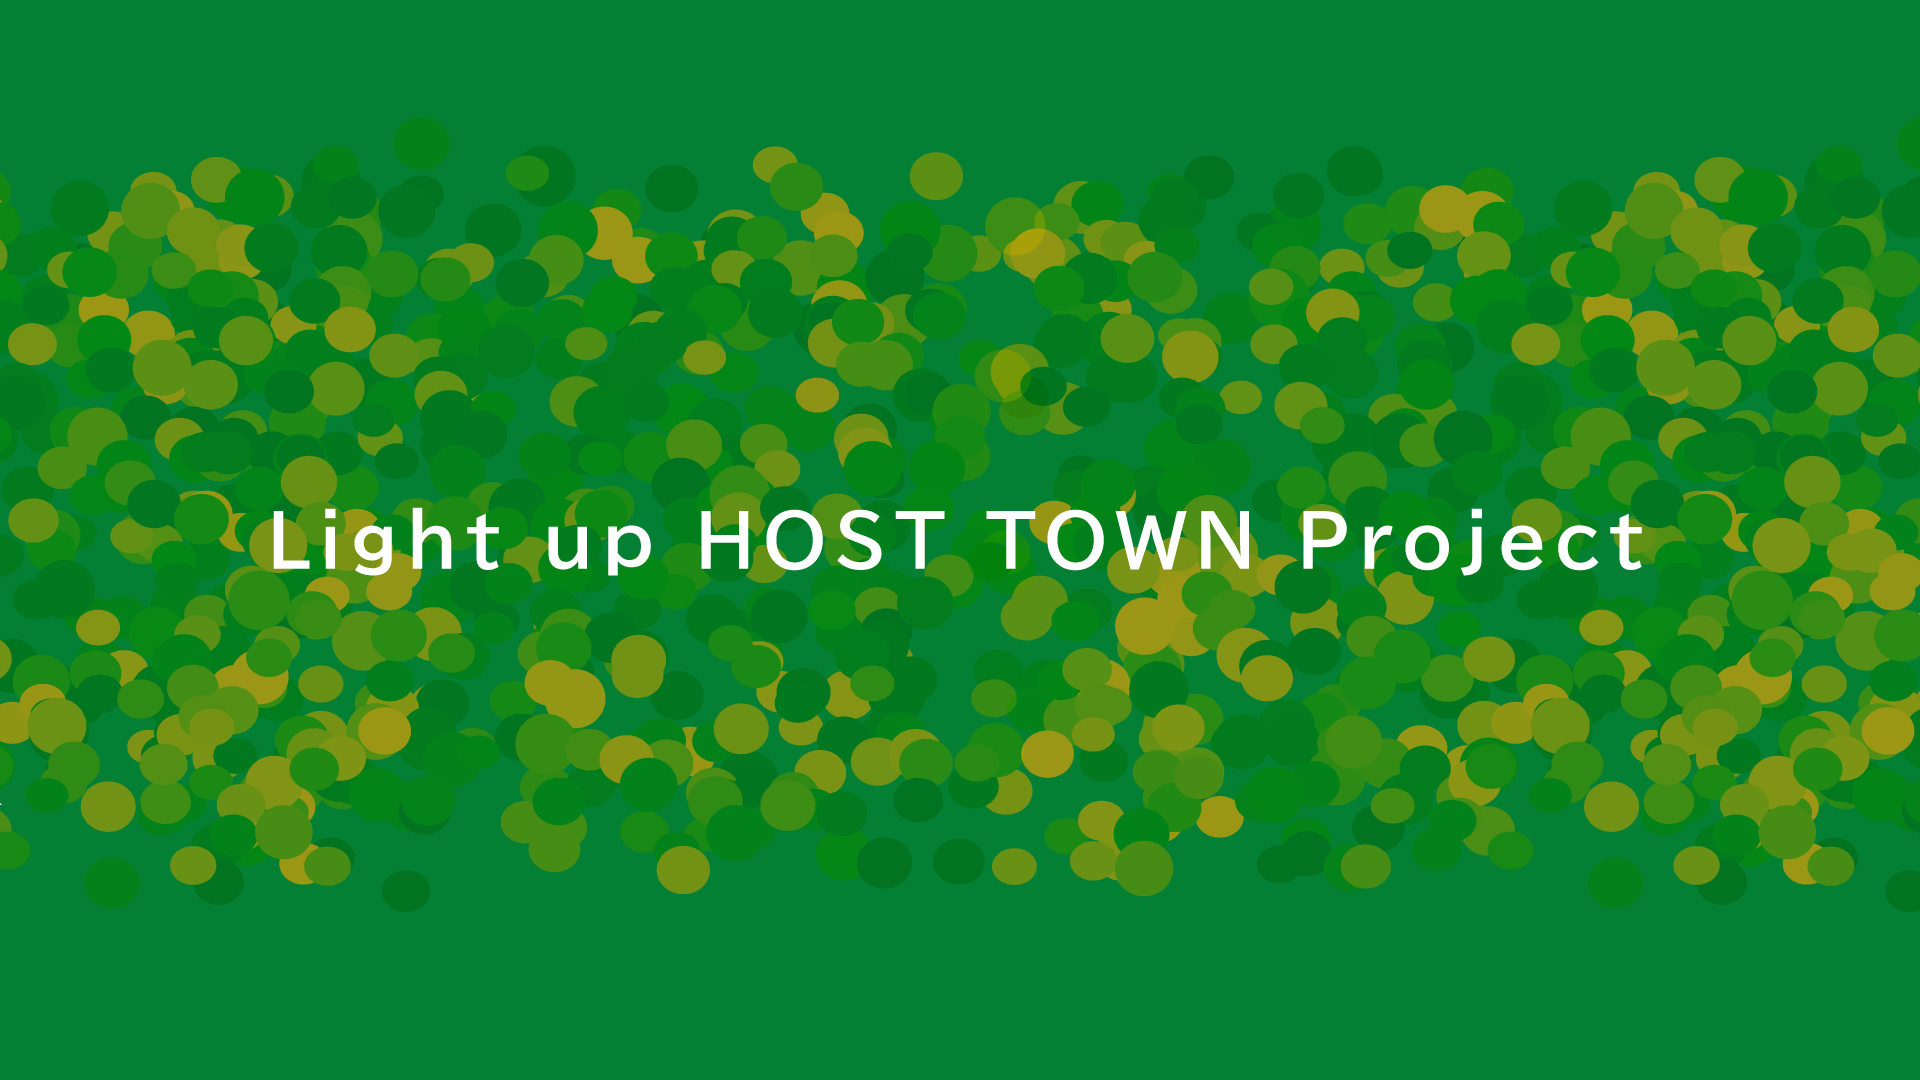 Light up HOST TOWN Project